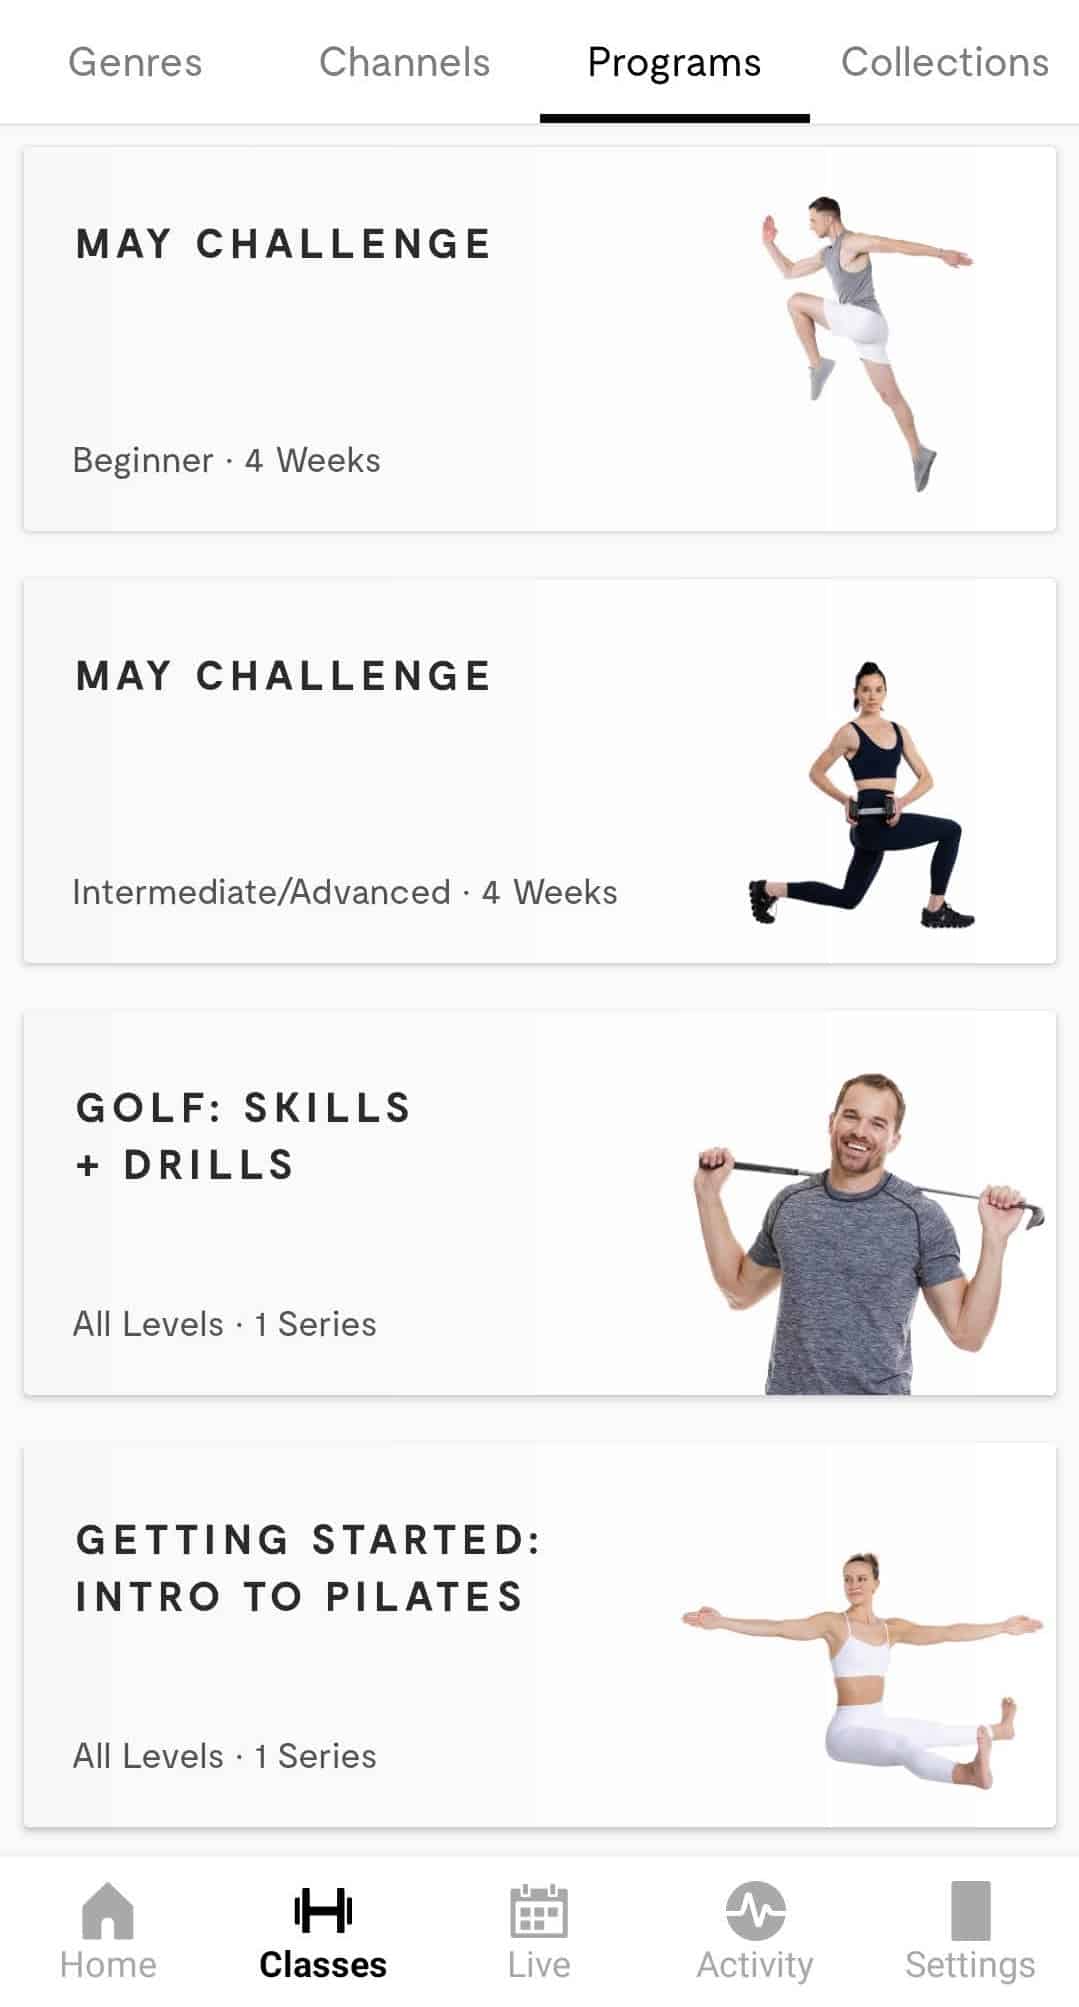 A screenshot of the different programs available in the lululemon studio app.